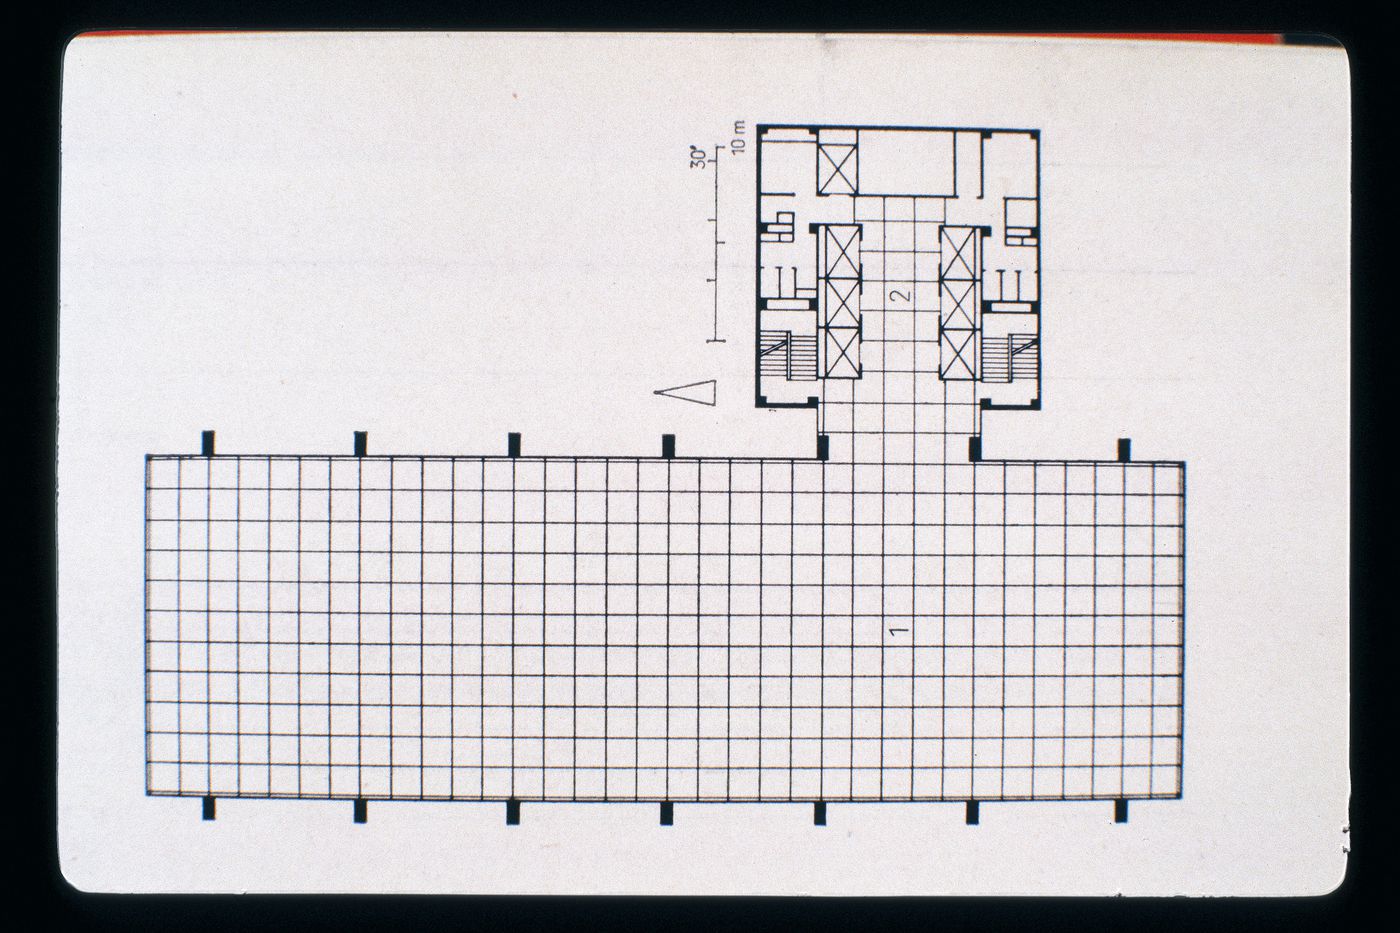 Slide of a drawing for Inland Steel Building, Chicago, by Bruce Graham, Walter Netsch and Fazlur Khan / SOM